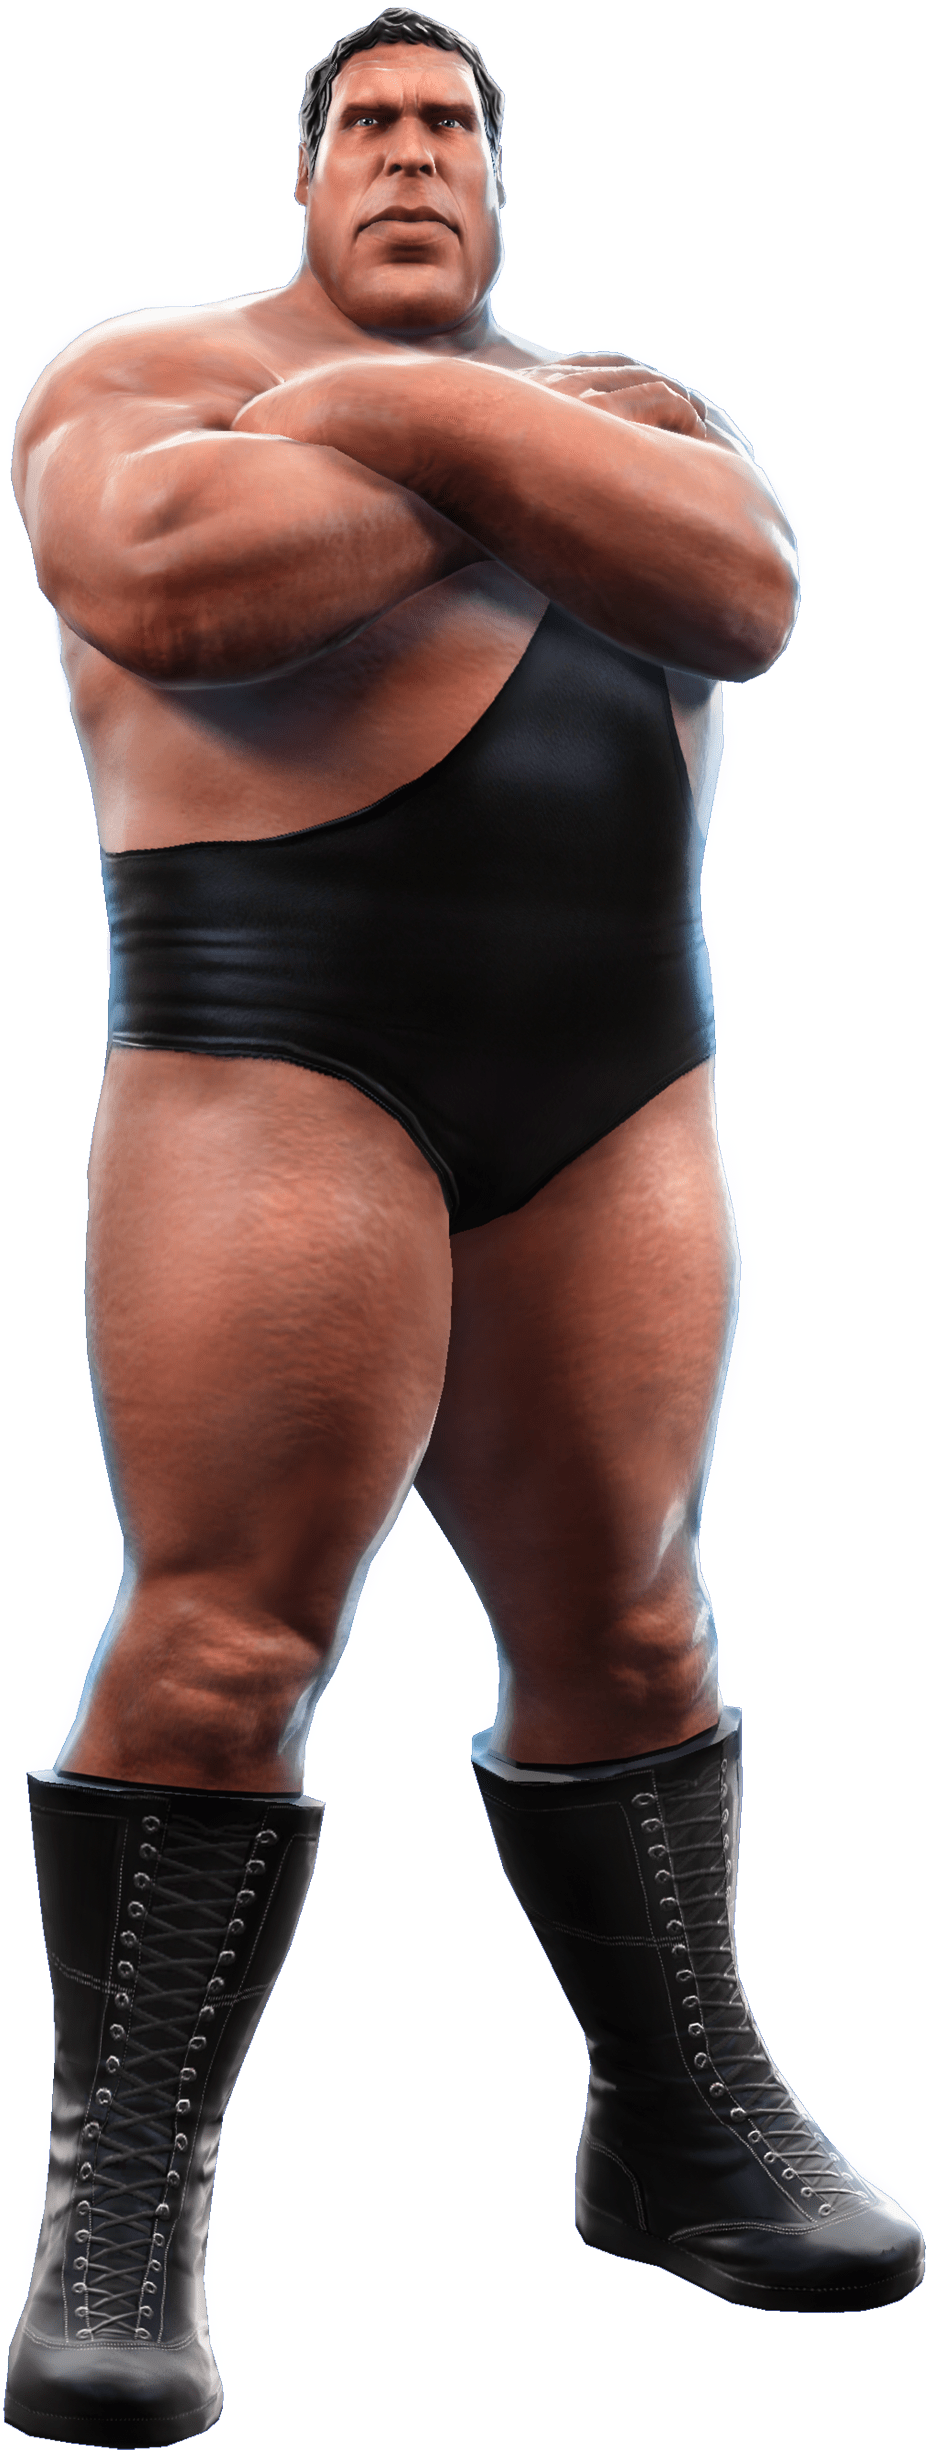 Giant Or G-iant - Andre The Giant Cartoon (1837x2750), Png Download